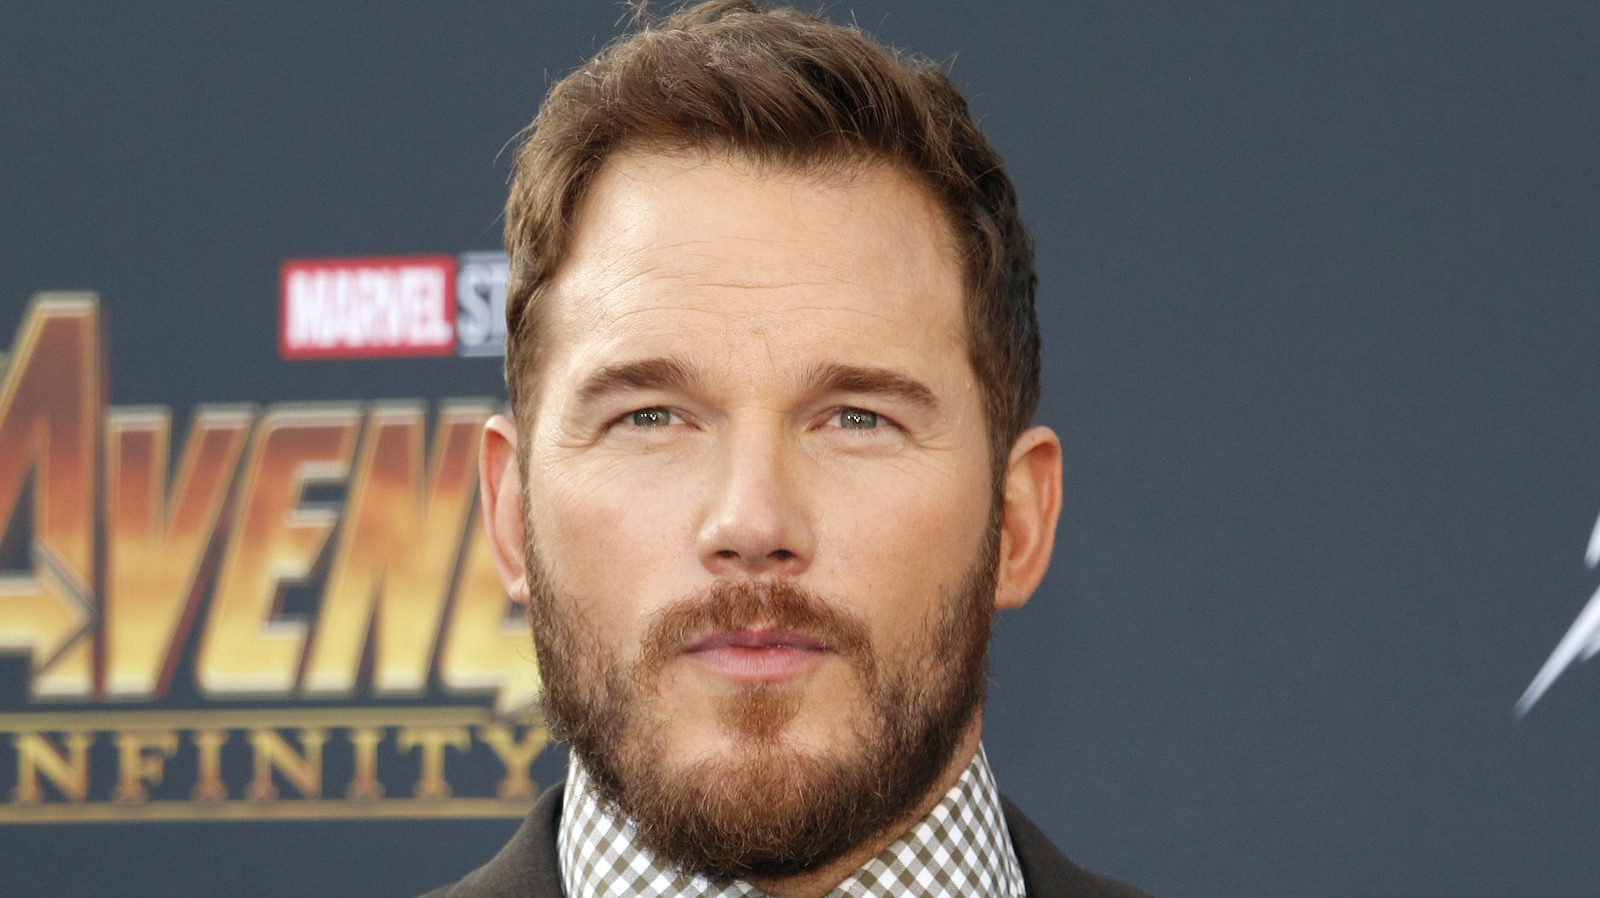 Cover Story: How Chris Pratt Became the All-American Actor